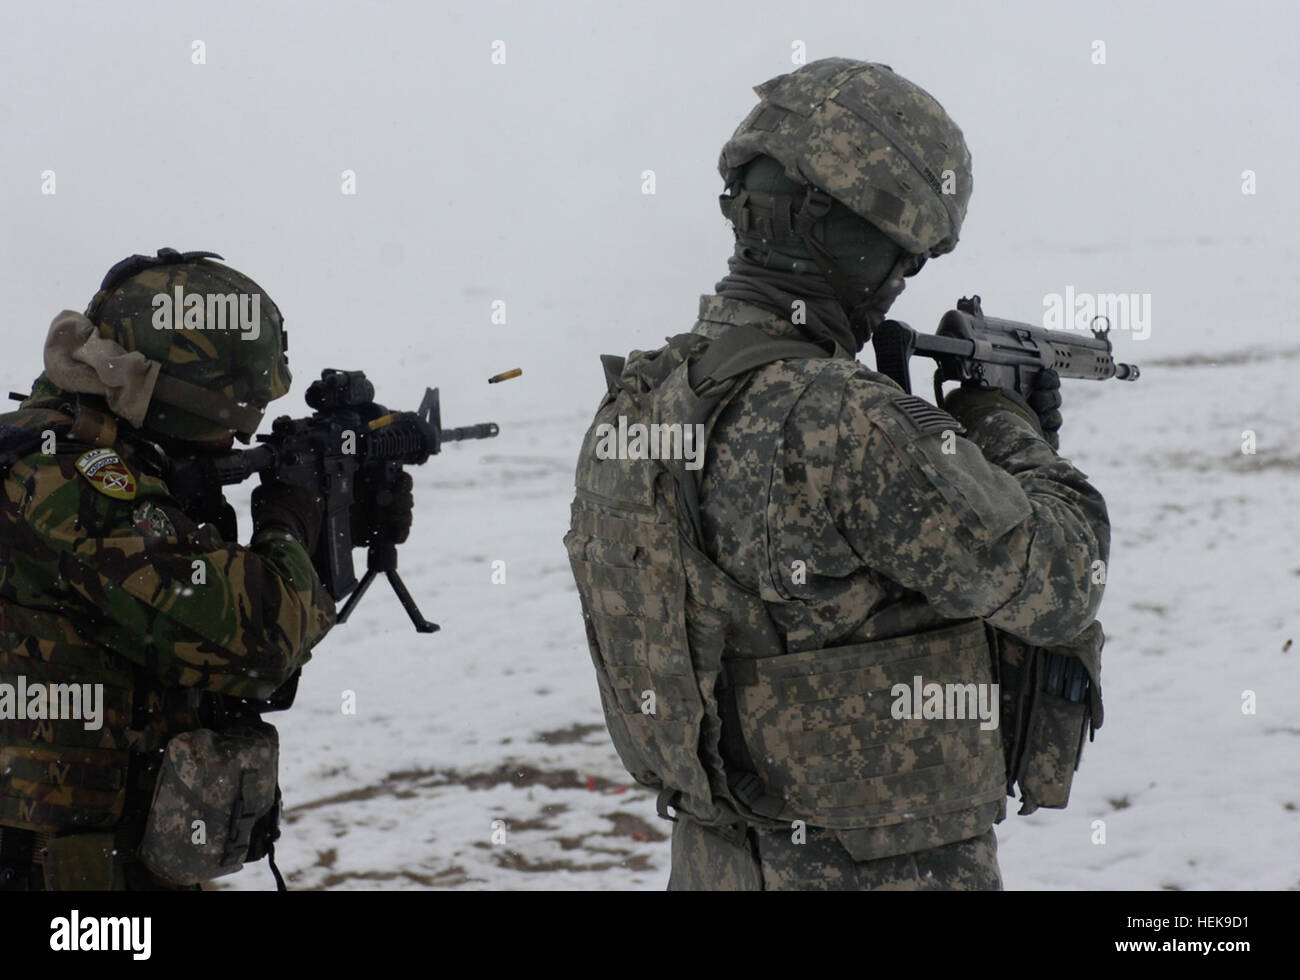 1181st Infantry Trains with Portuguese Forces in Kabul - Image 4 of 5 Stock Photo